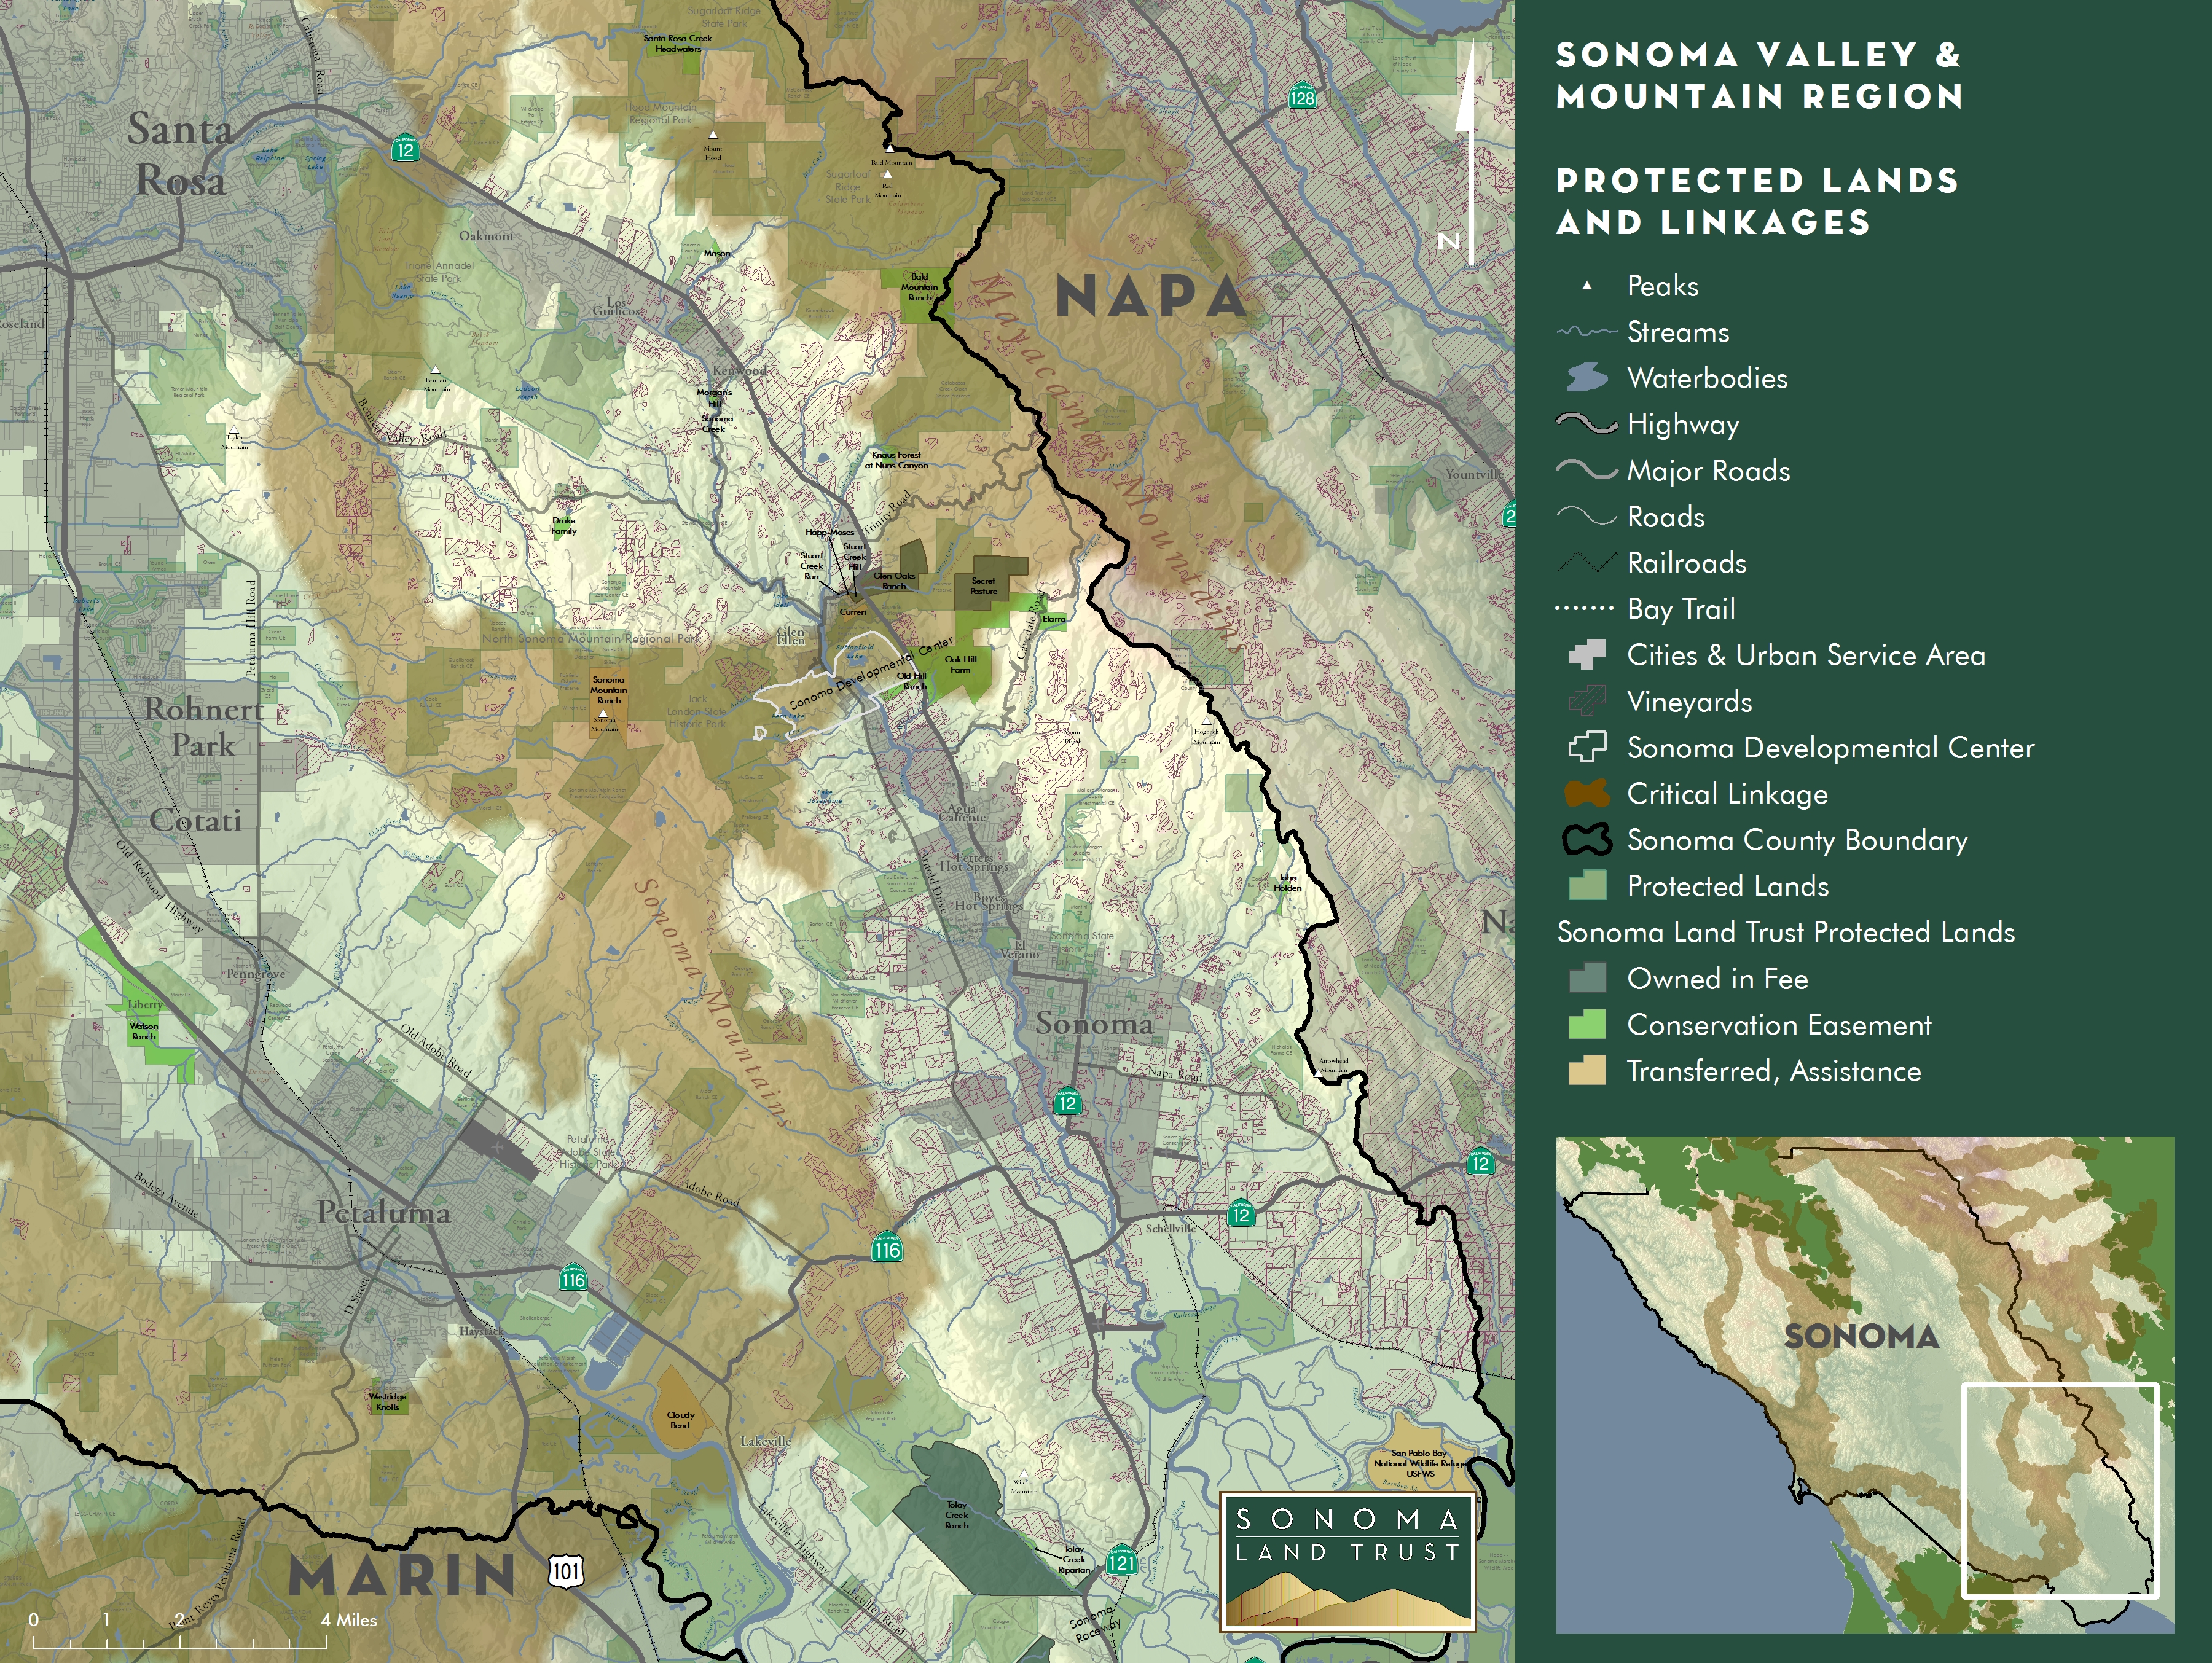 Protected Lands and Linkages in southern Sonoma County with elevation data from the Sonoma County Veg Map Project and linkage information from the Bay Area Critical Linkages Joseph Kinyon, Sonoma Land Trust